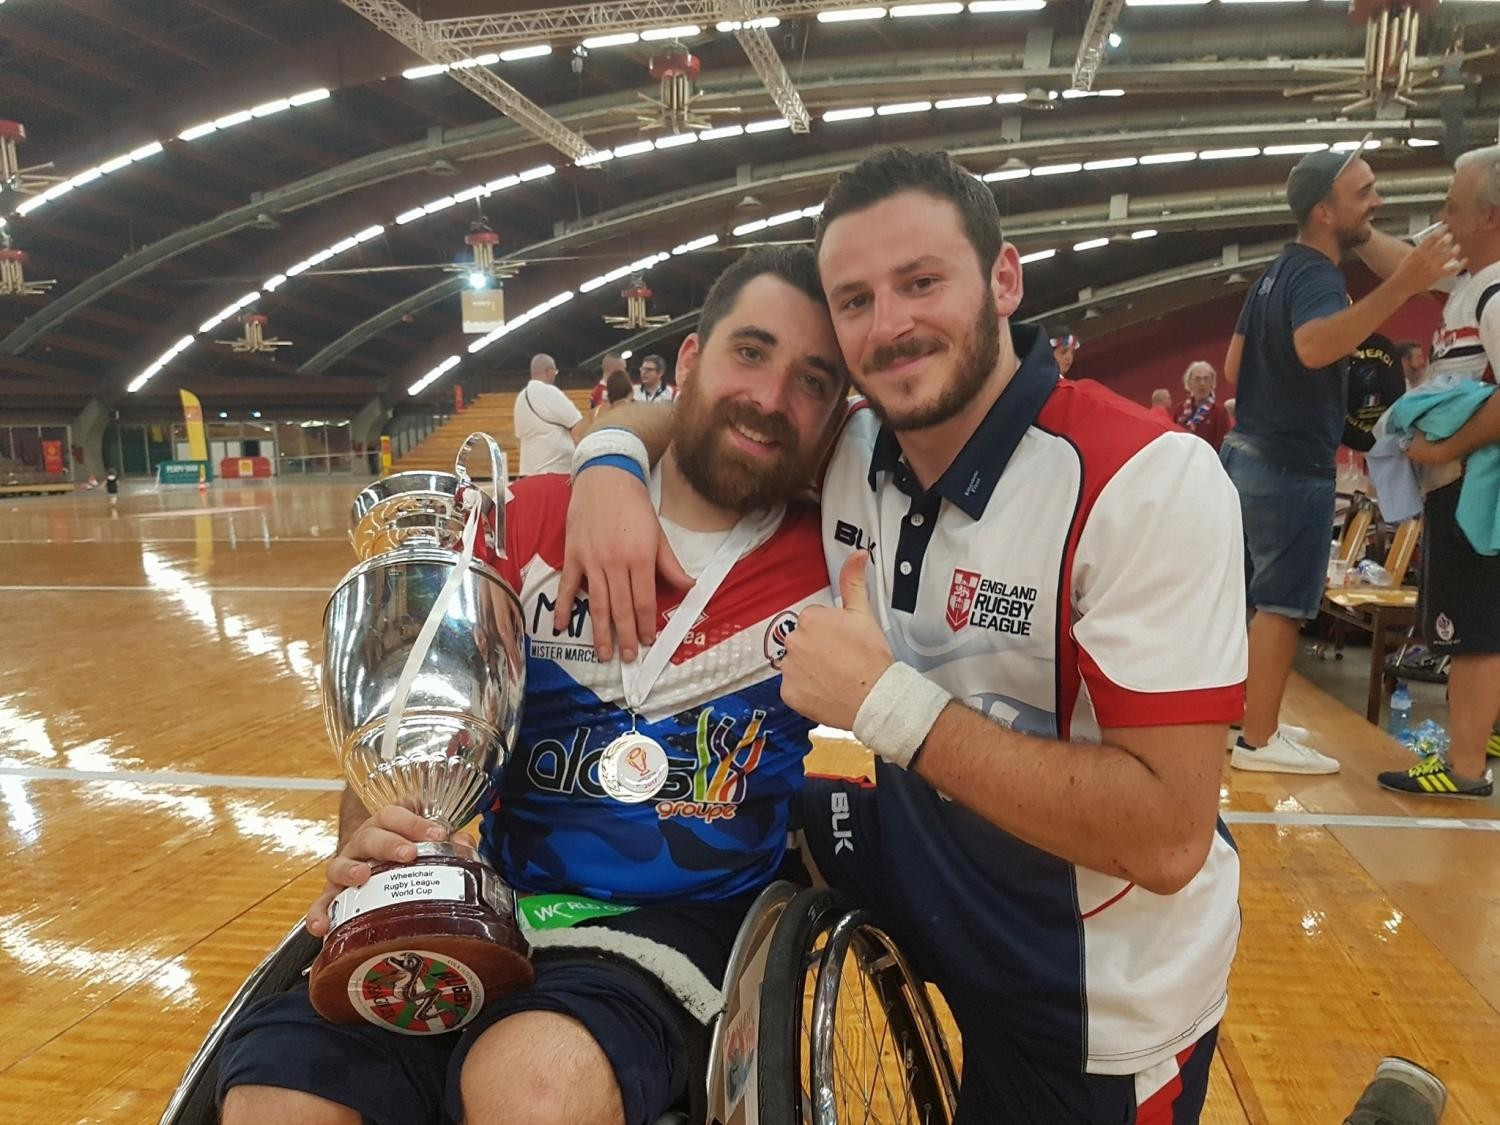 France topped the inaugural International Rugby League wheelchair rugby league world rankings ©RLIF